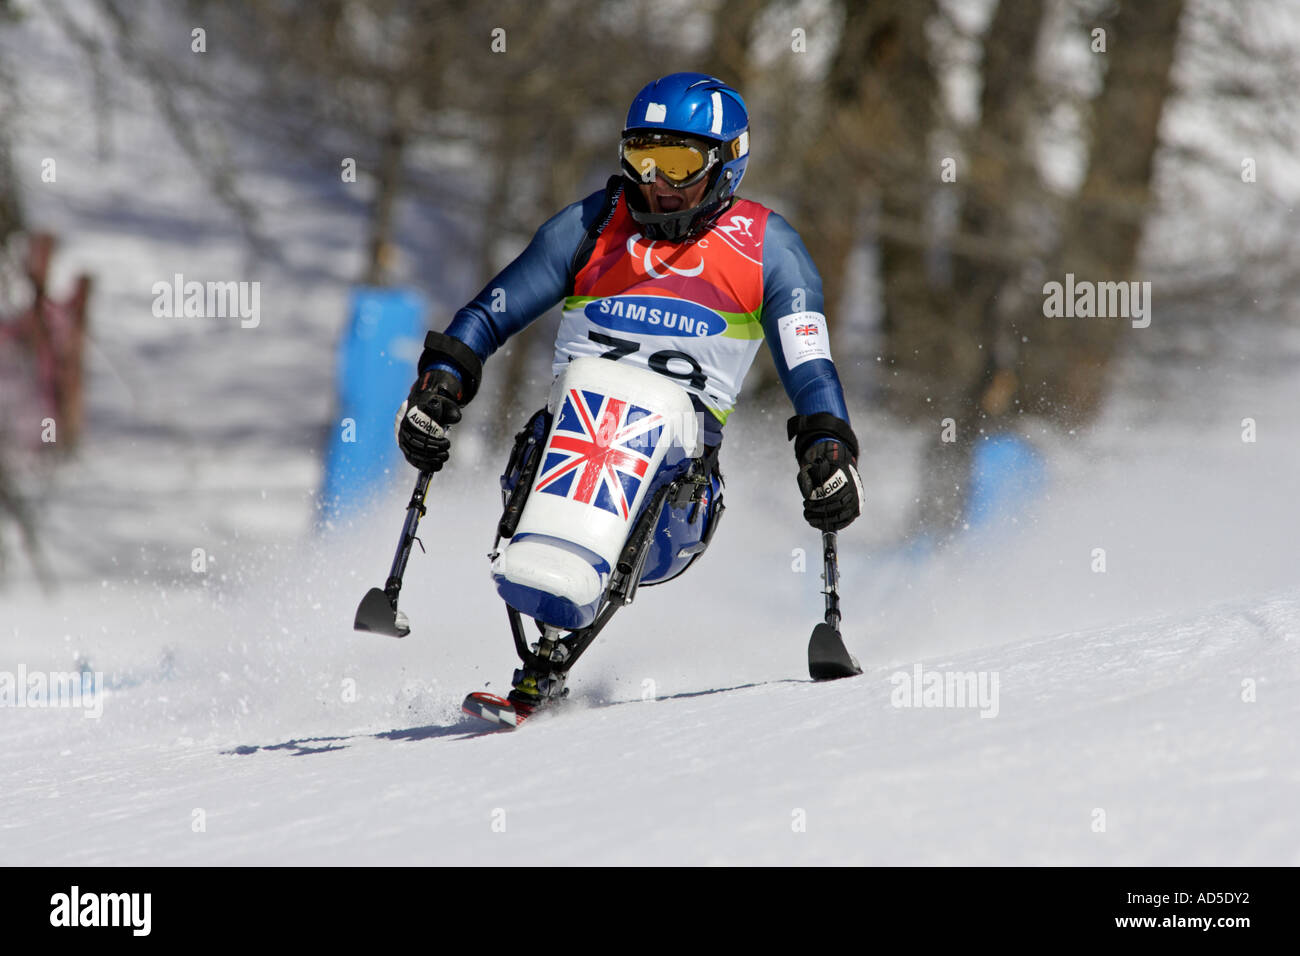 Sean Rose of Great Britain in the Mens Alpine Skiing Giant Slalom Sitting competition Stock Photo